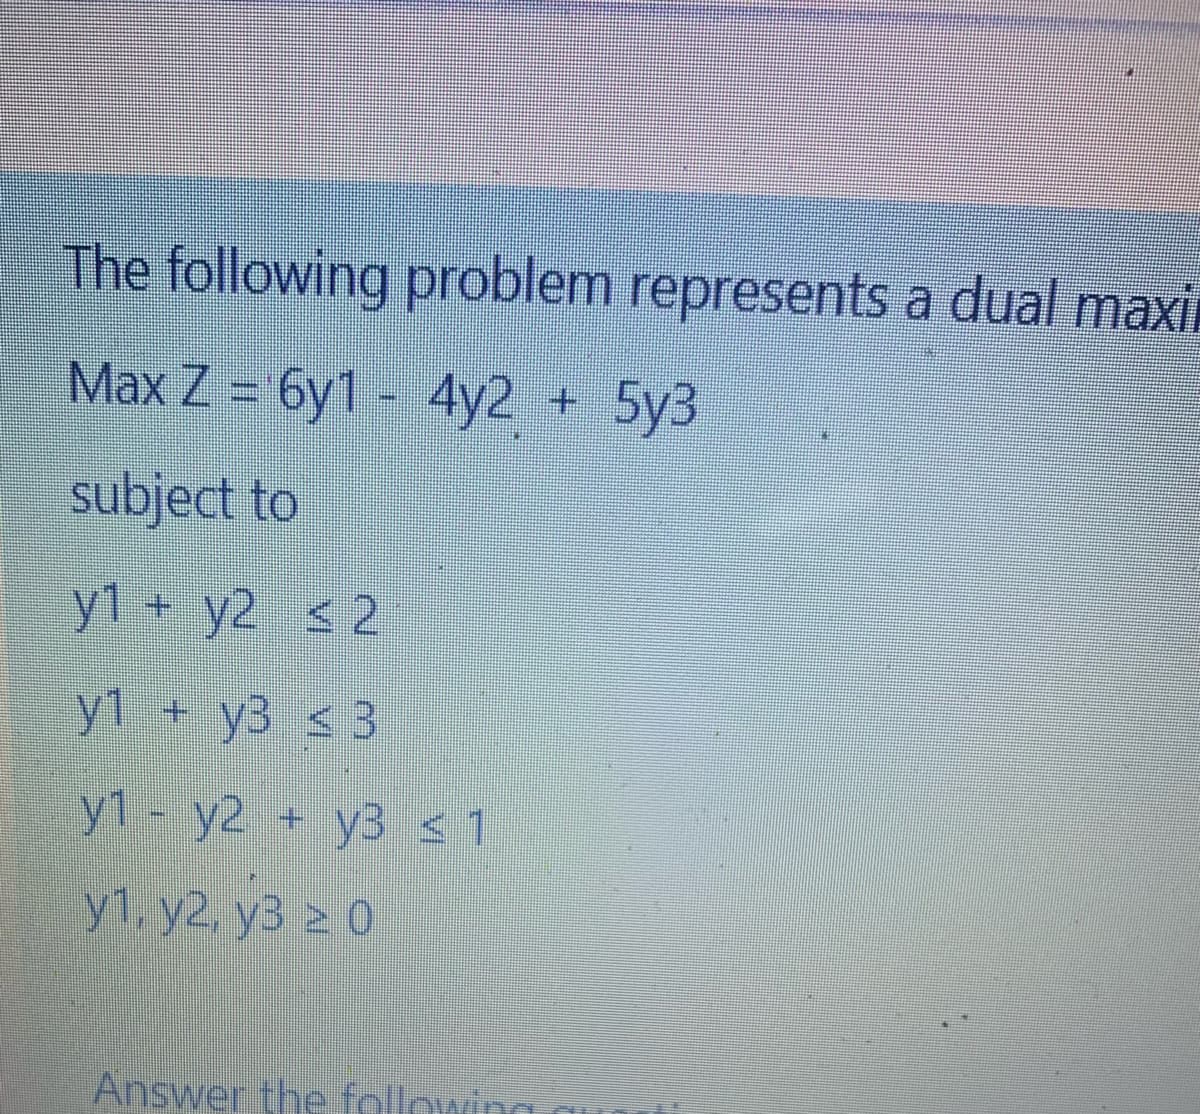 The following problem represents a dual maxil
Max Z = 6y1 - 4y2 + 5y3
subject to
y1 + y2 < 2
y1 + y3 ≤ 3
y1 - y2 + y3 ≤ 1
y1, y2, y3 ≥ 0
Answer the following